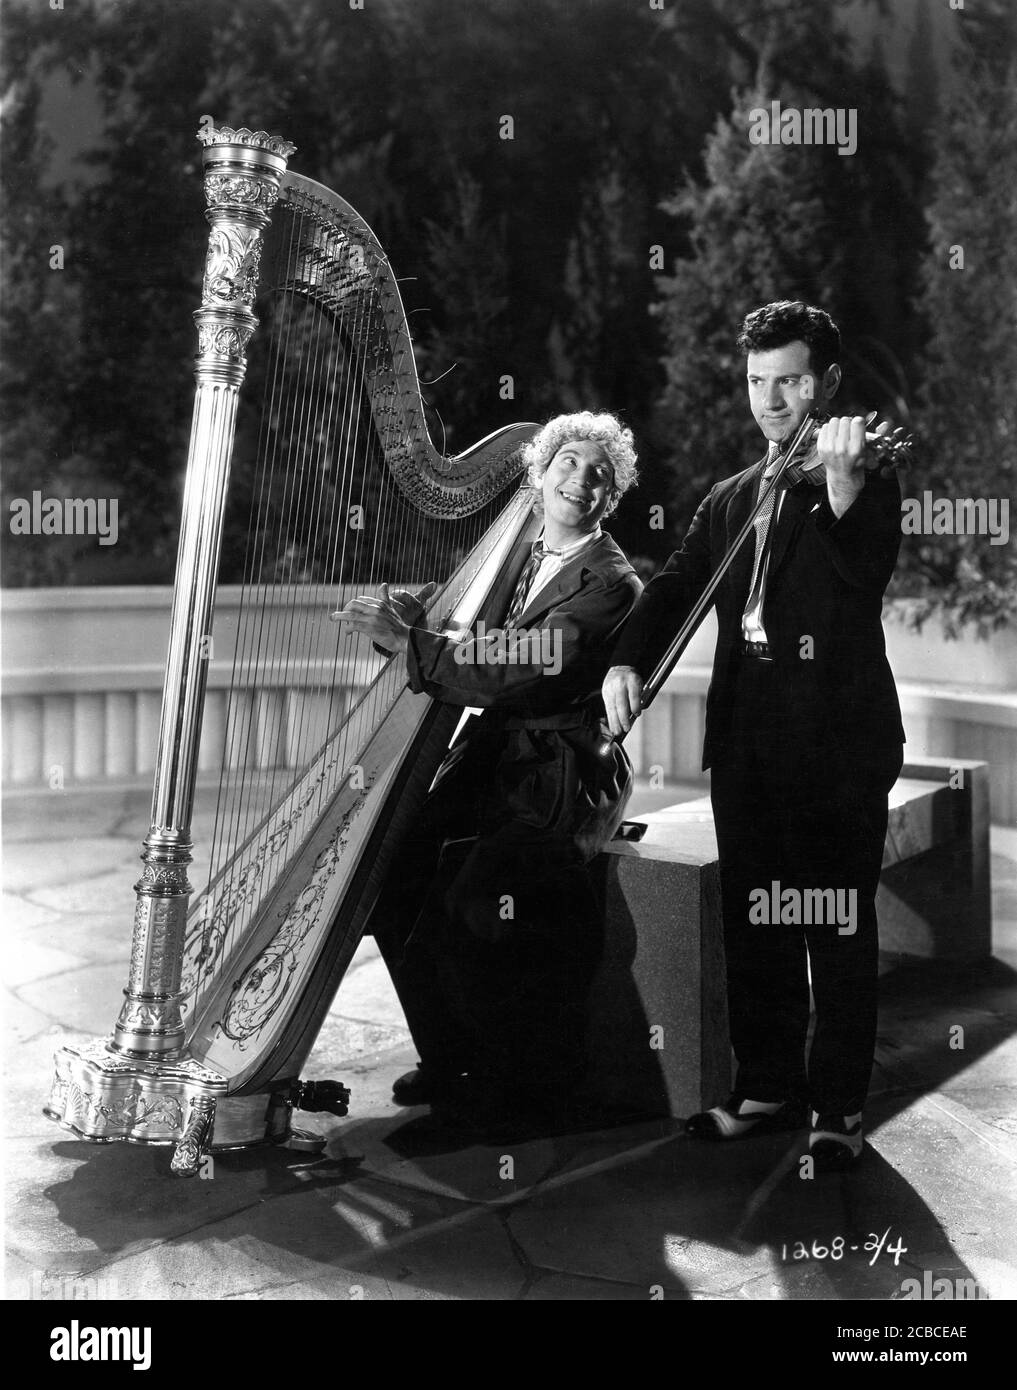 HARPO MARX plays his harp accompanied by violinist on set candid at Paramount Astoria Studios in New York during filming of ANIMAL CRACKERS 1930 director VICTOR HEERMAN based on musical play by George S. Kaufman Morrie Ryskind Bert Kalmar and Harry Ruby Paramount Pictures Stock Photo